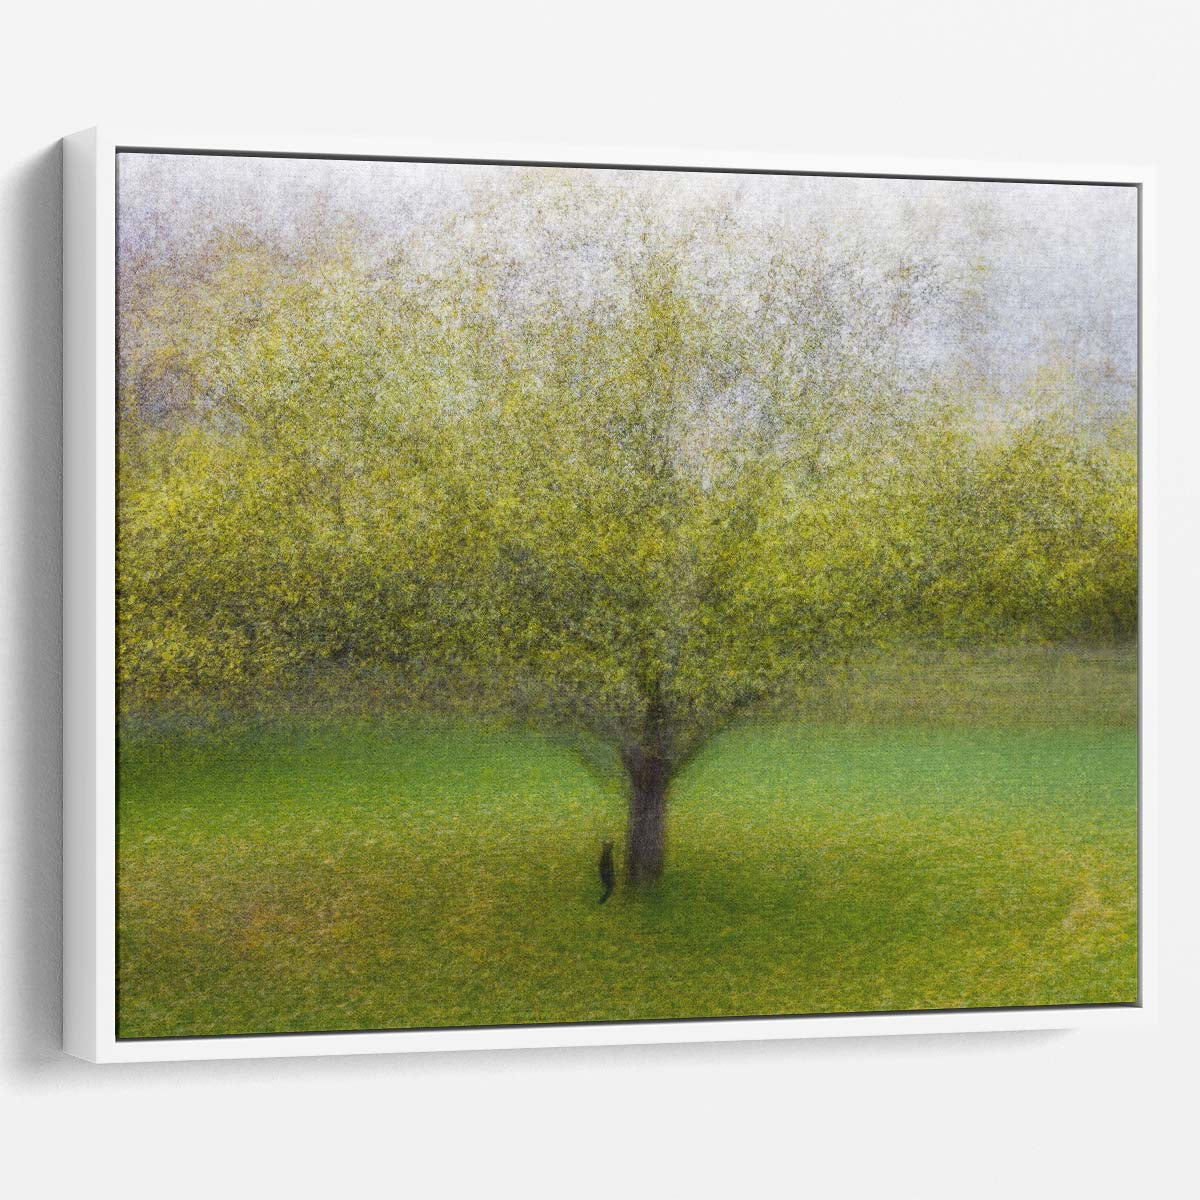 Impressionistic Cat Among Green Leaves Wall Art by Luxuriance Designs. Made in USA.